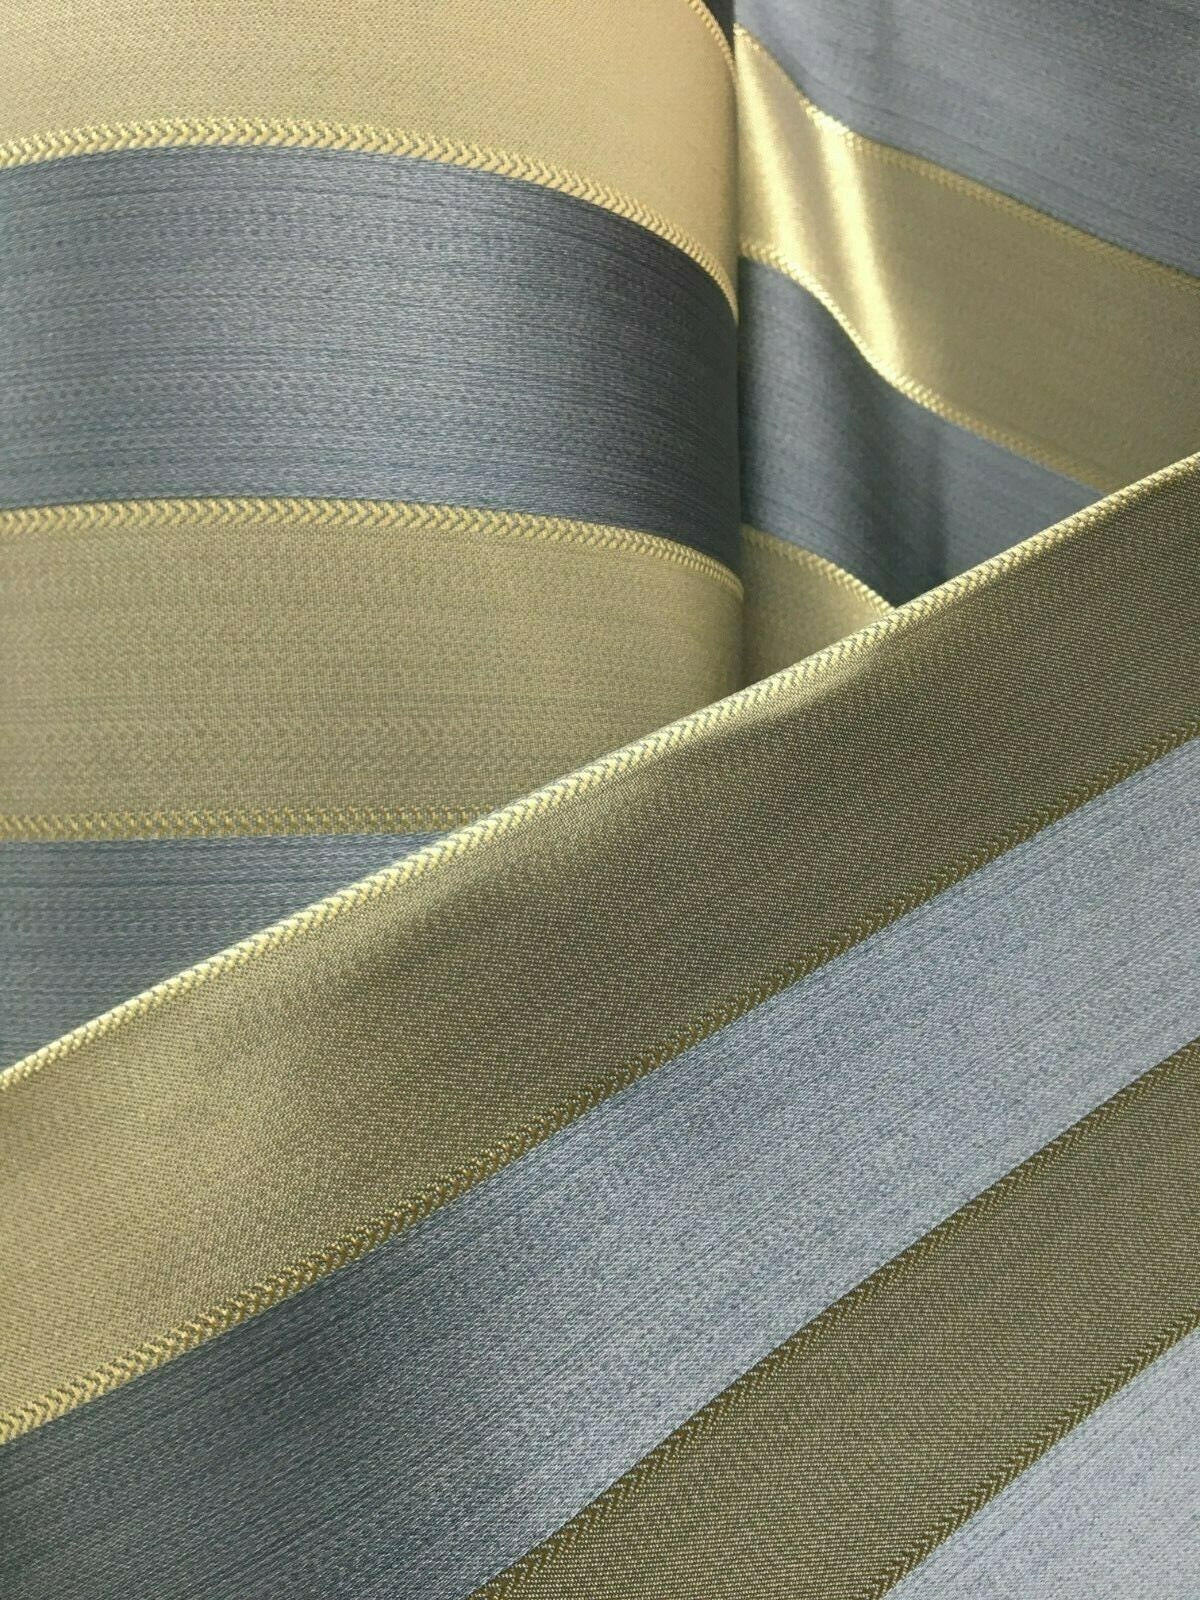 NEW Designer Striped Upholstery & Drapery Fabric - Gold and Gray